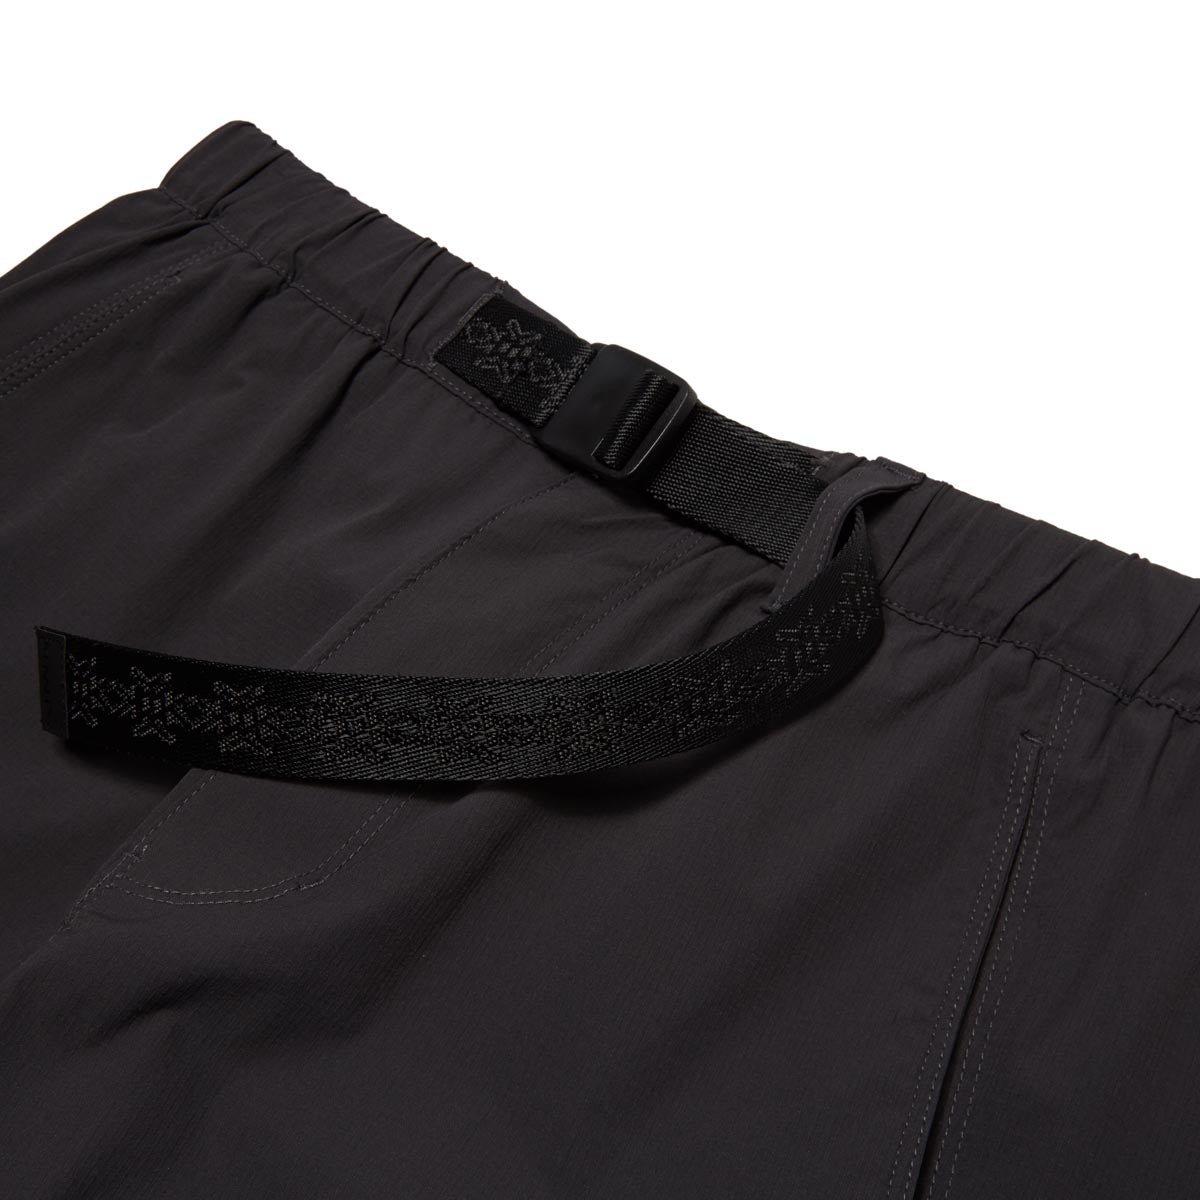 Kennedy The Ascension Cargo Pants - Charcoal image 3